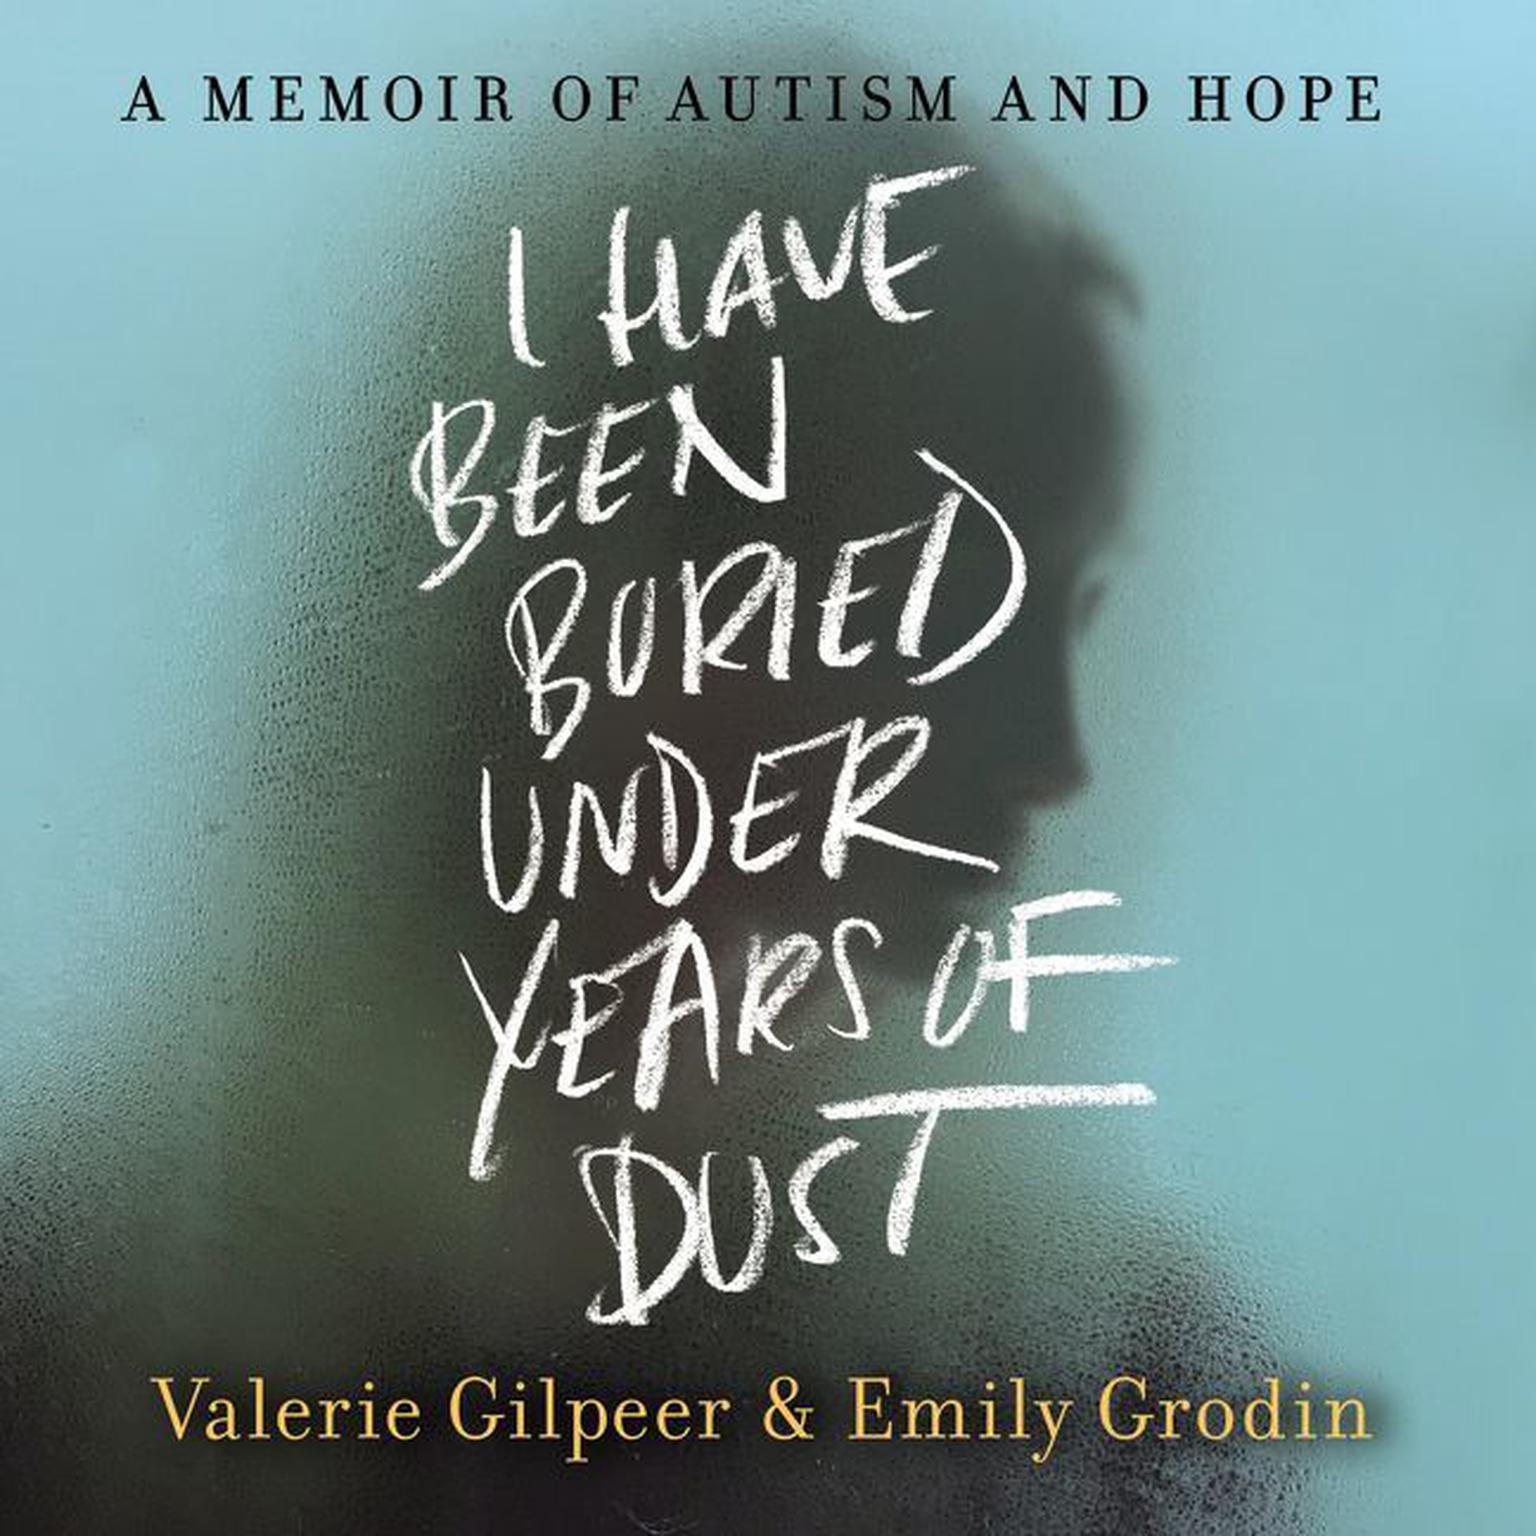 I Have Been Buried Under Years of Dust: A Memoir of Autism and Hope Audiobook, by Emily Grodin